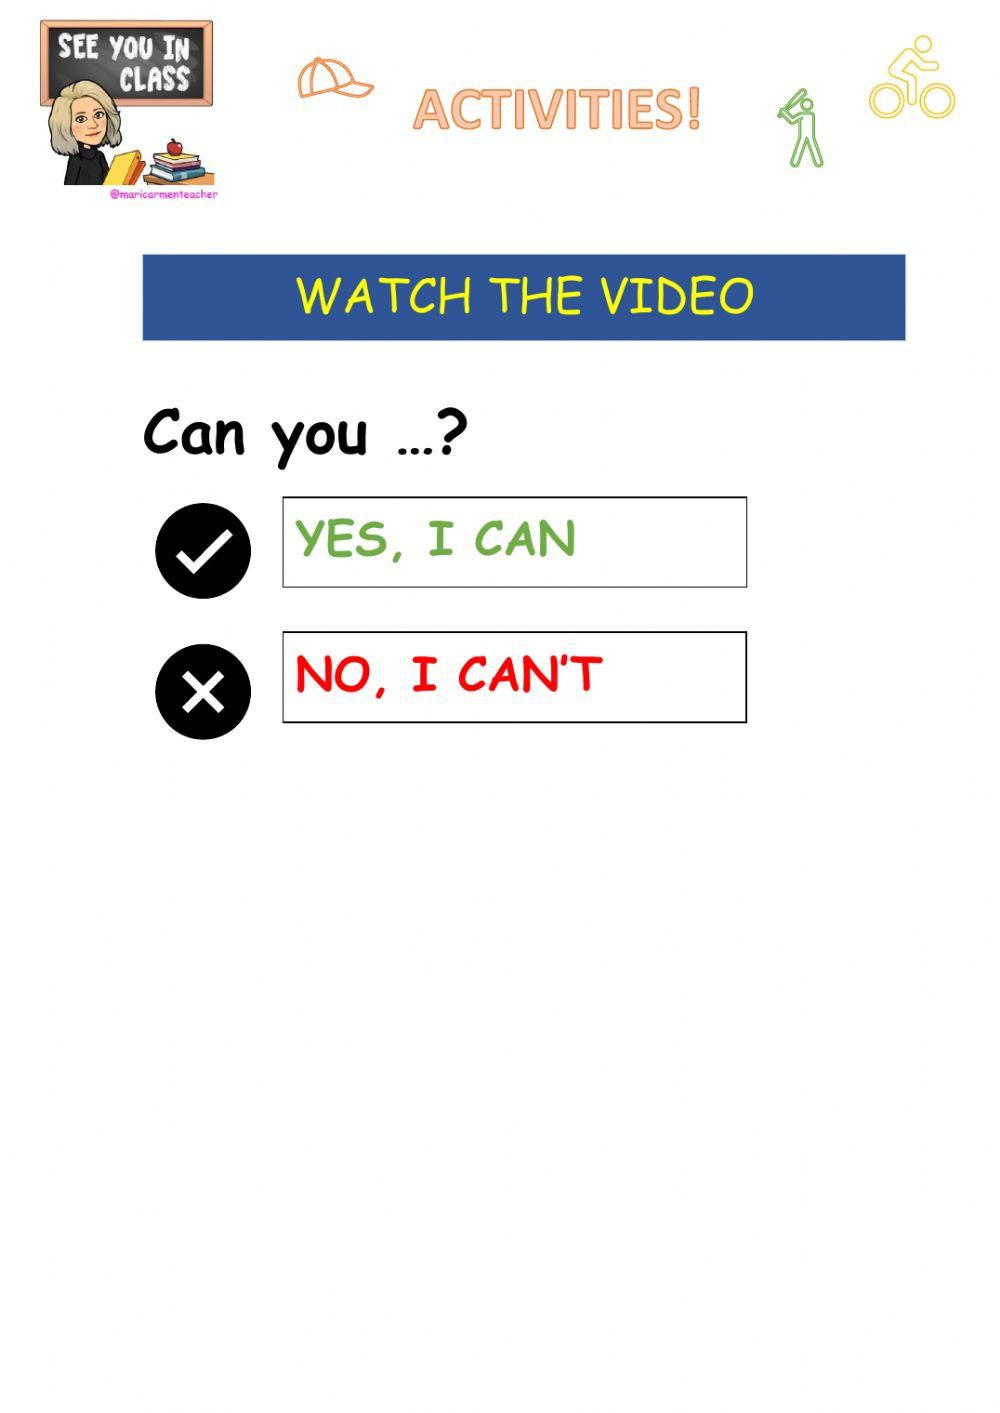 Yes i can -no i can't